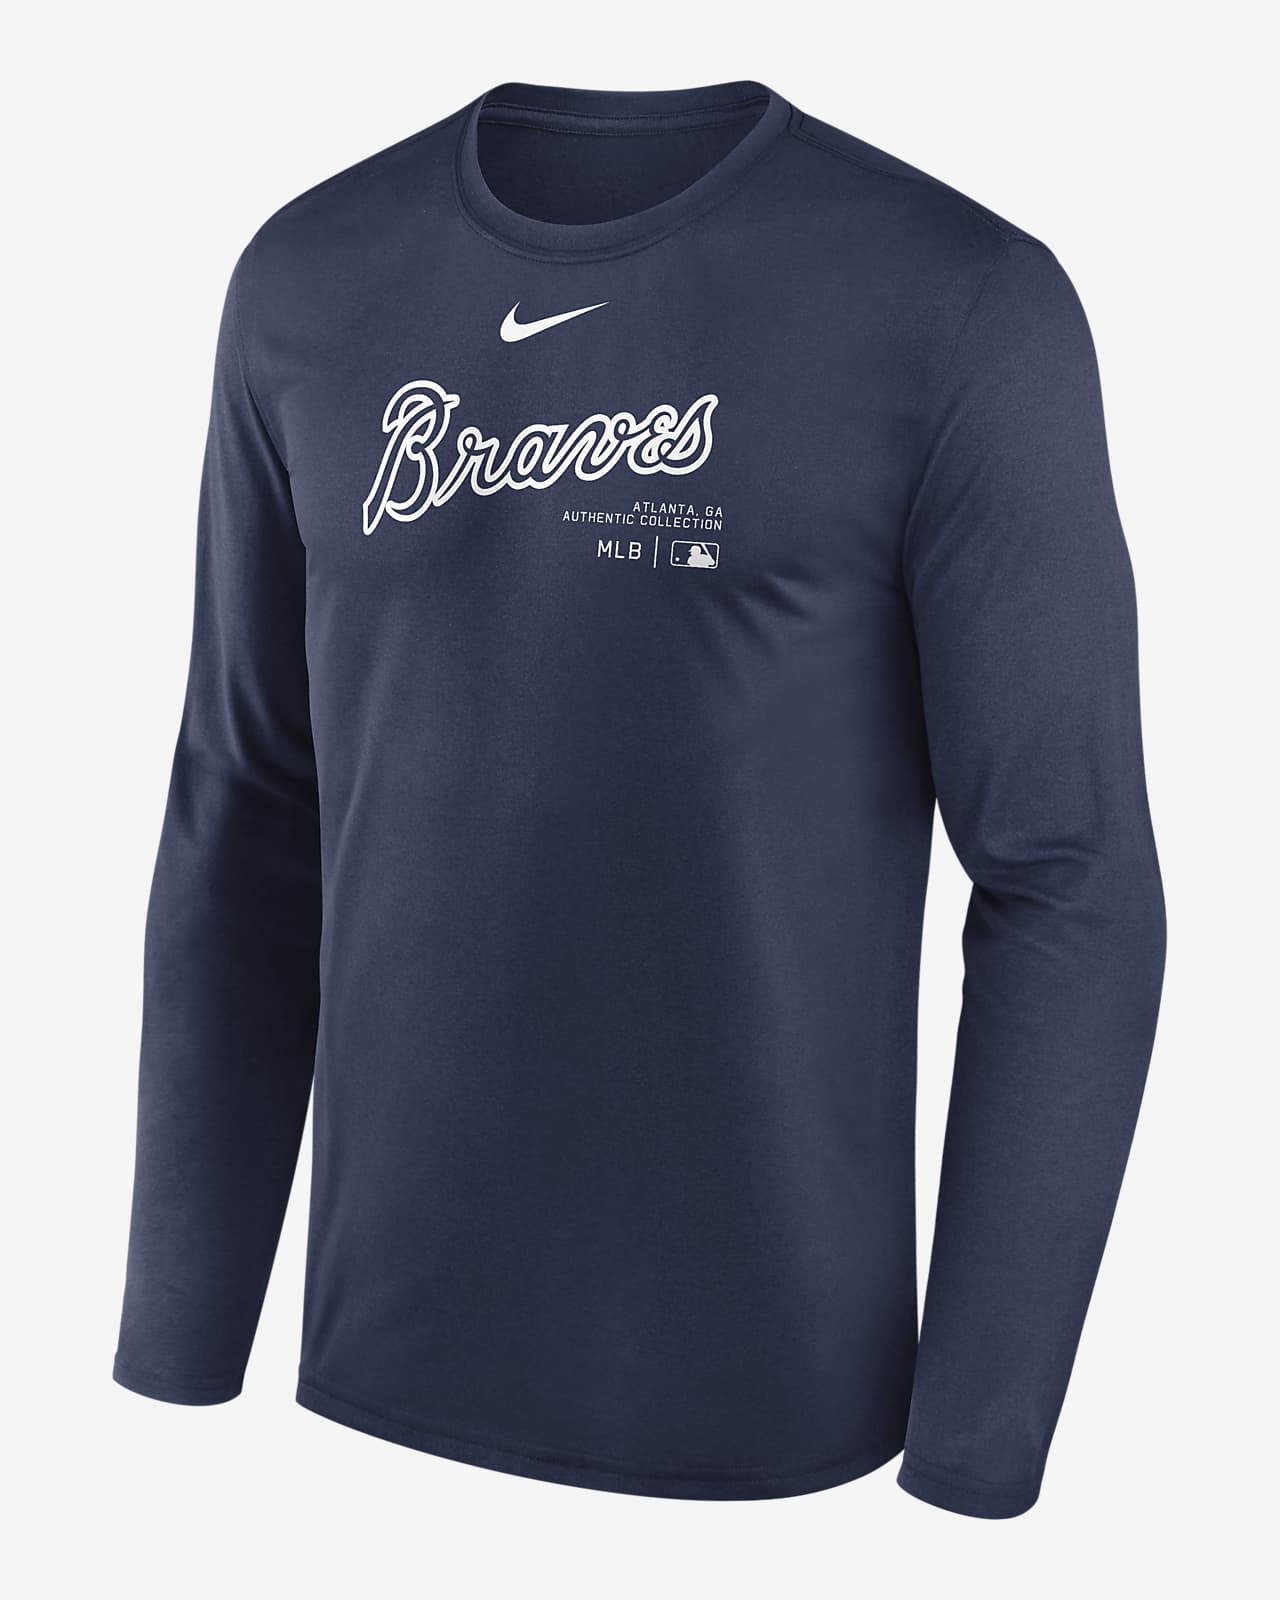 https://static.nike.com/a/images/t_PDP_1280_v1/f_auto,q_auto:eco/2011c8bc-92b0-44f6-a313-a823a58ad0ef/atlanta-braves-authentic-collection-practice-mens-dri-fit-long-sleeve-t-shirt-Q1f2hr.png